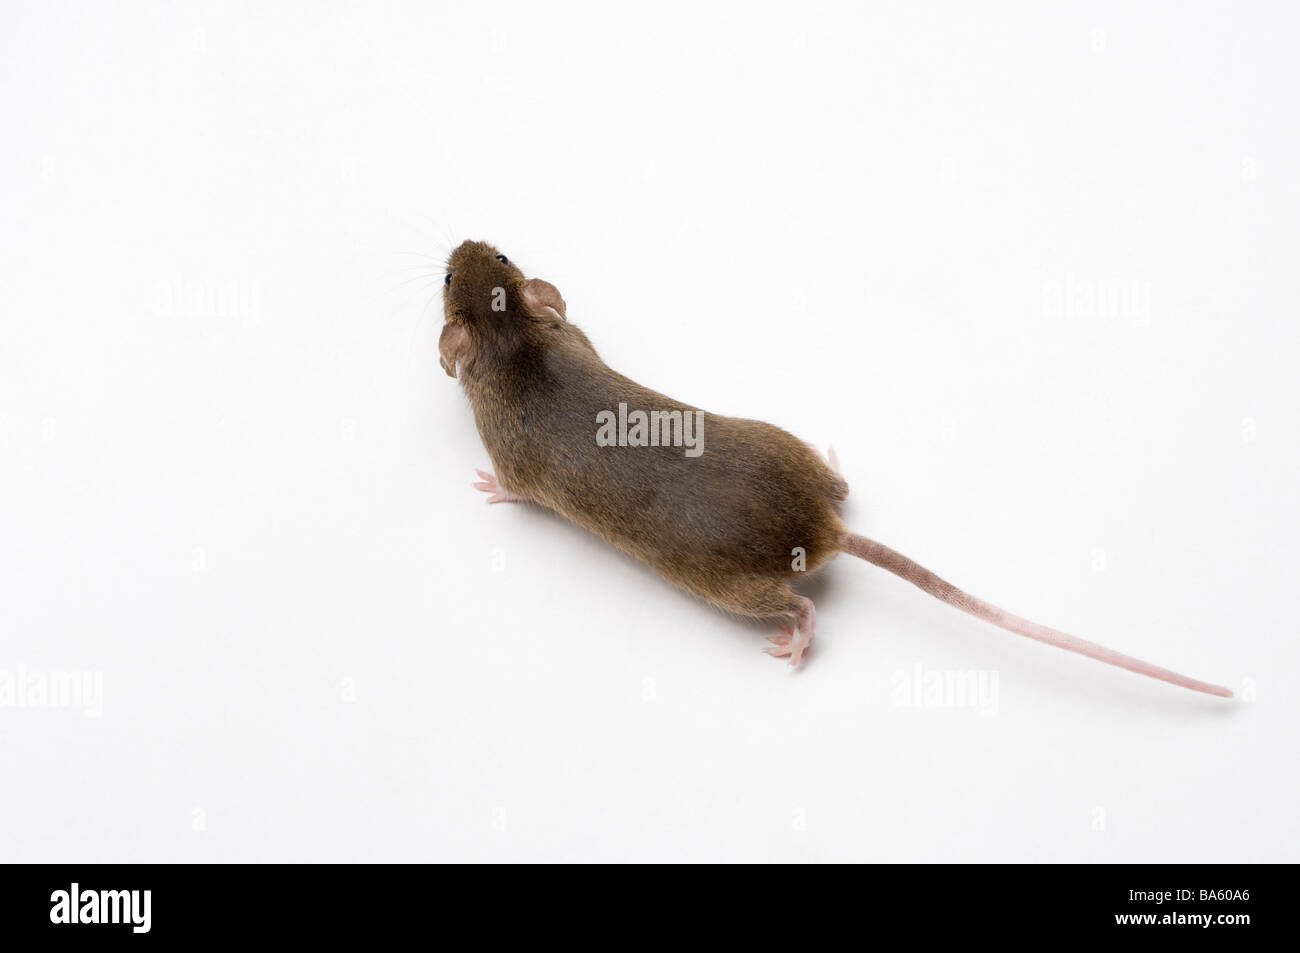 House Mouse Mus musculus Foto Stock